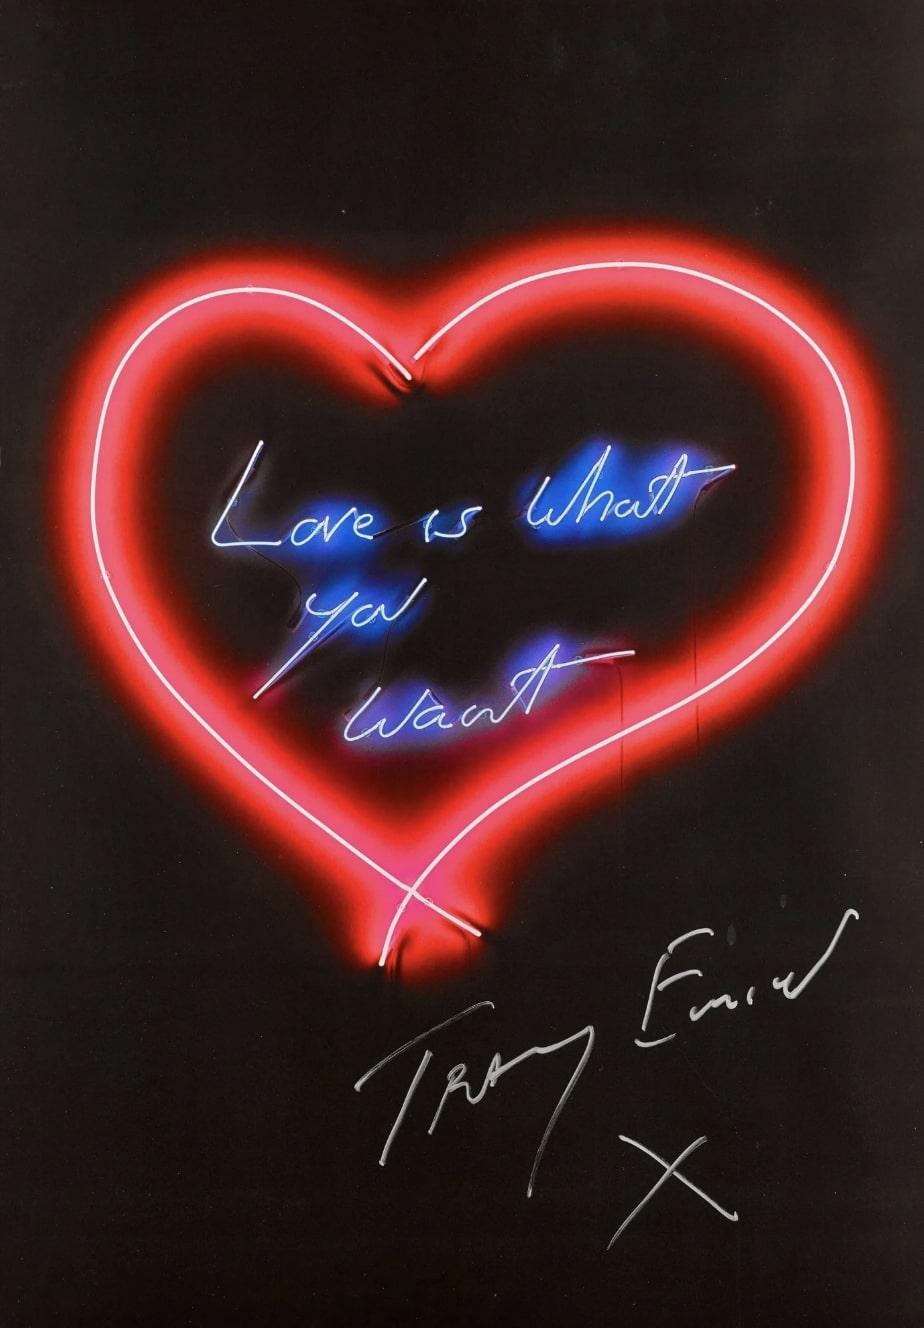 Tracey emin  Figurative Print - Love Is What You Want by Tracey Emin